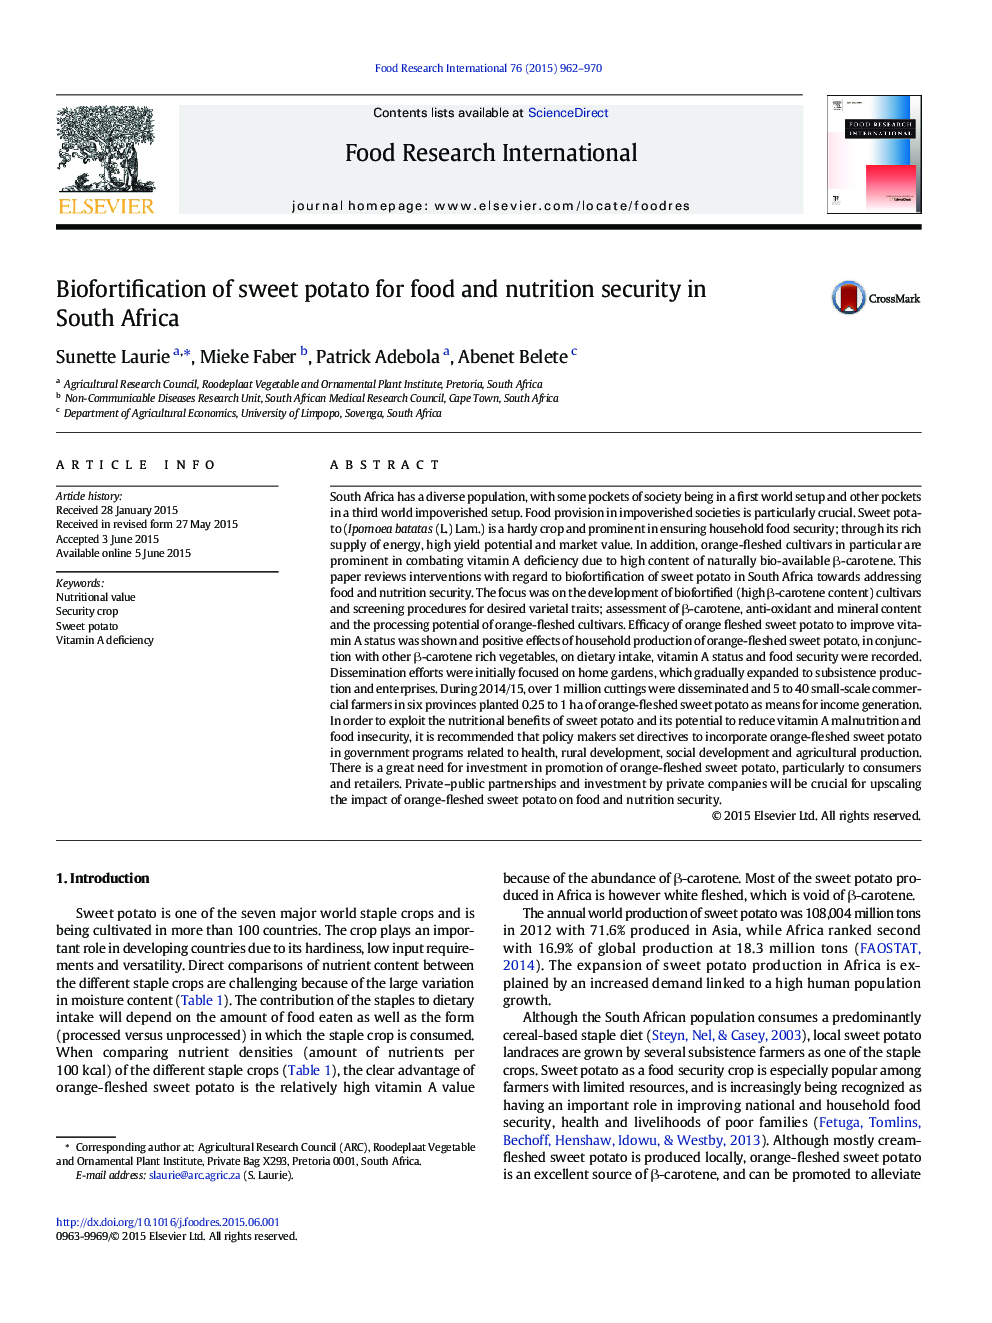 Biofortification of sweet potato for food and nutrition security in South Africa